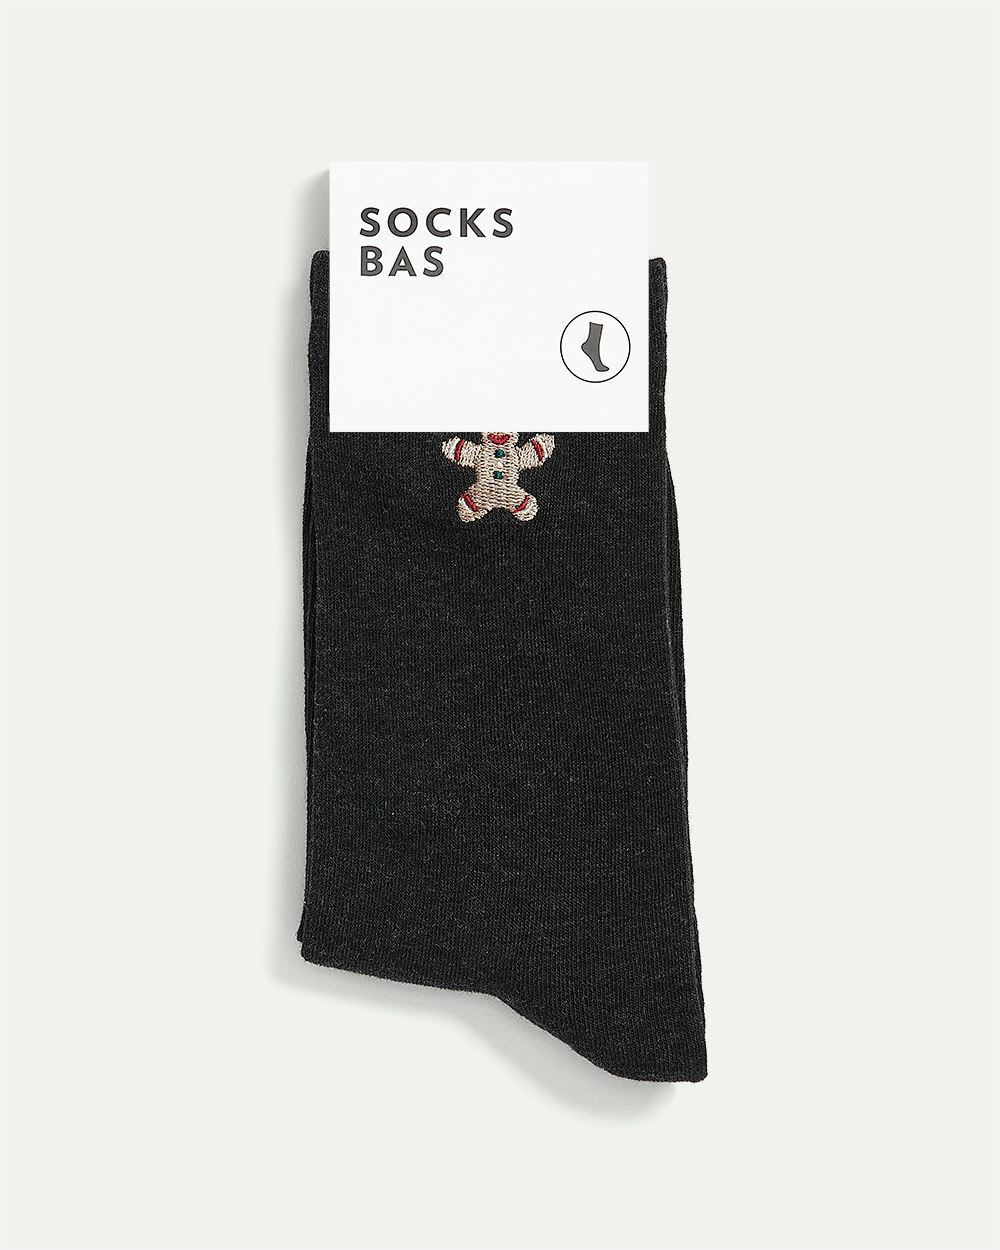 Cotton Socks with a Gingerbread Cookie